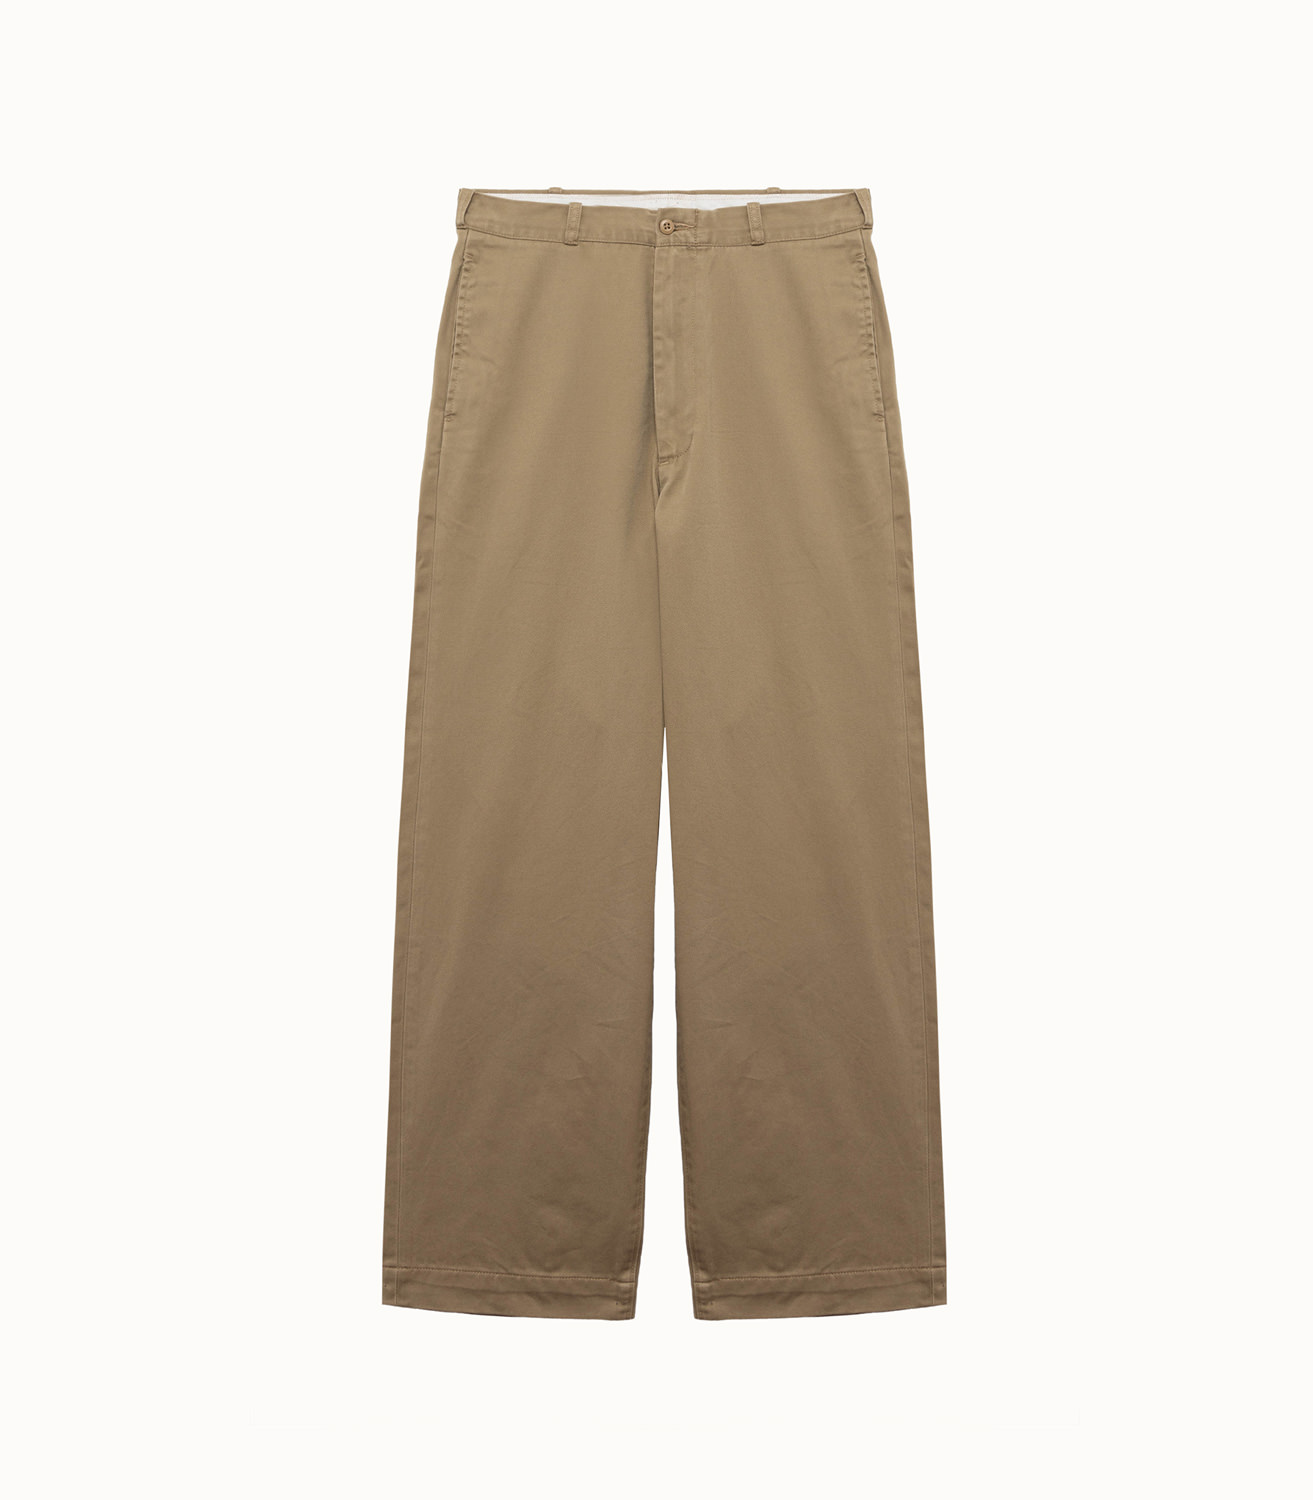 LEVIS SKATE LOOSE CHINO PANTS IN COTTON | Playground